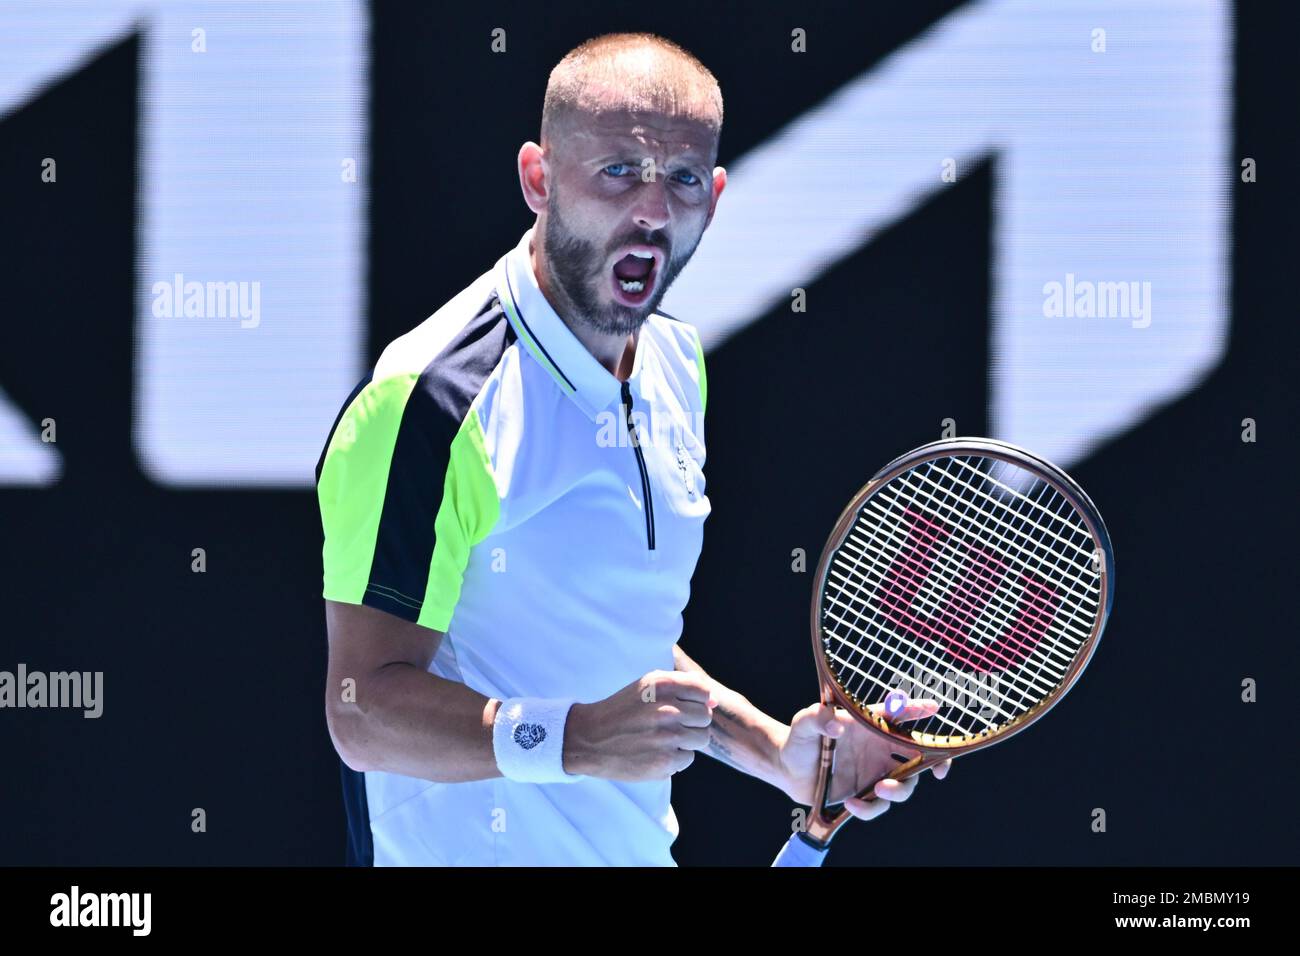 Daniel Evans of Great Britain wins a point during his match against Andrey Rublev of Russia during the 2023 Australian Open tennis tournament at Melbourne Park in Melbourne, Saturday, January 21, 2023